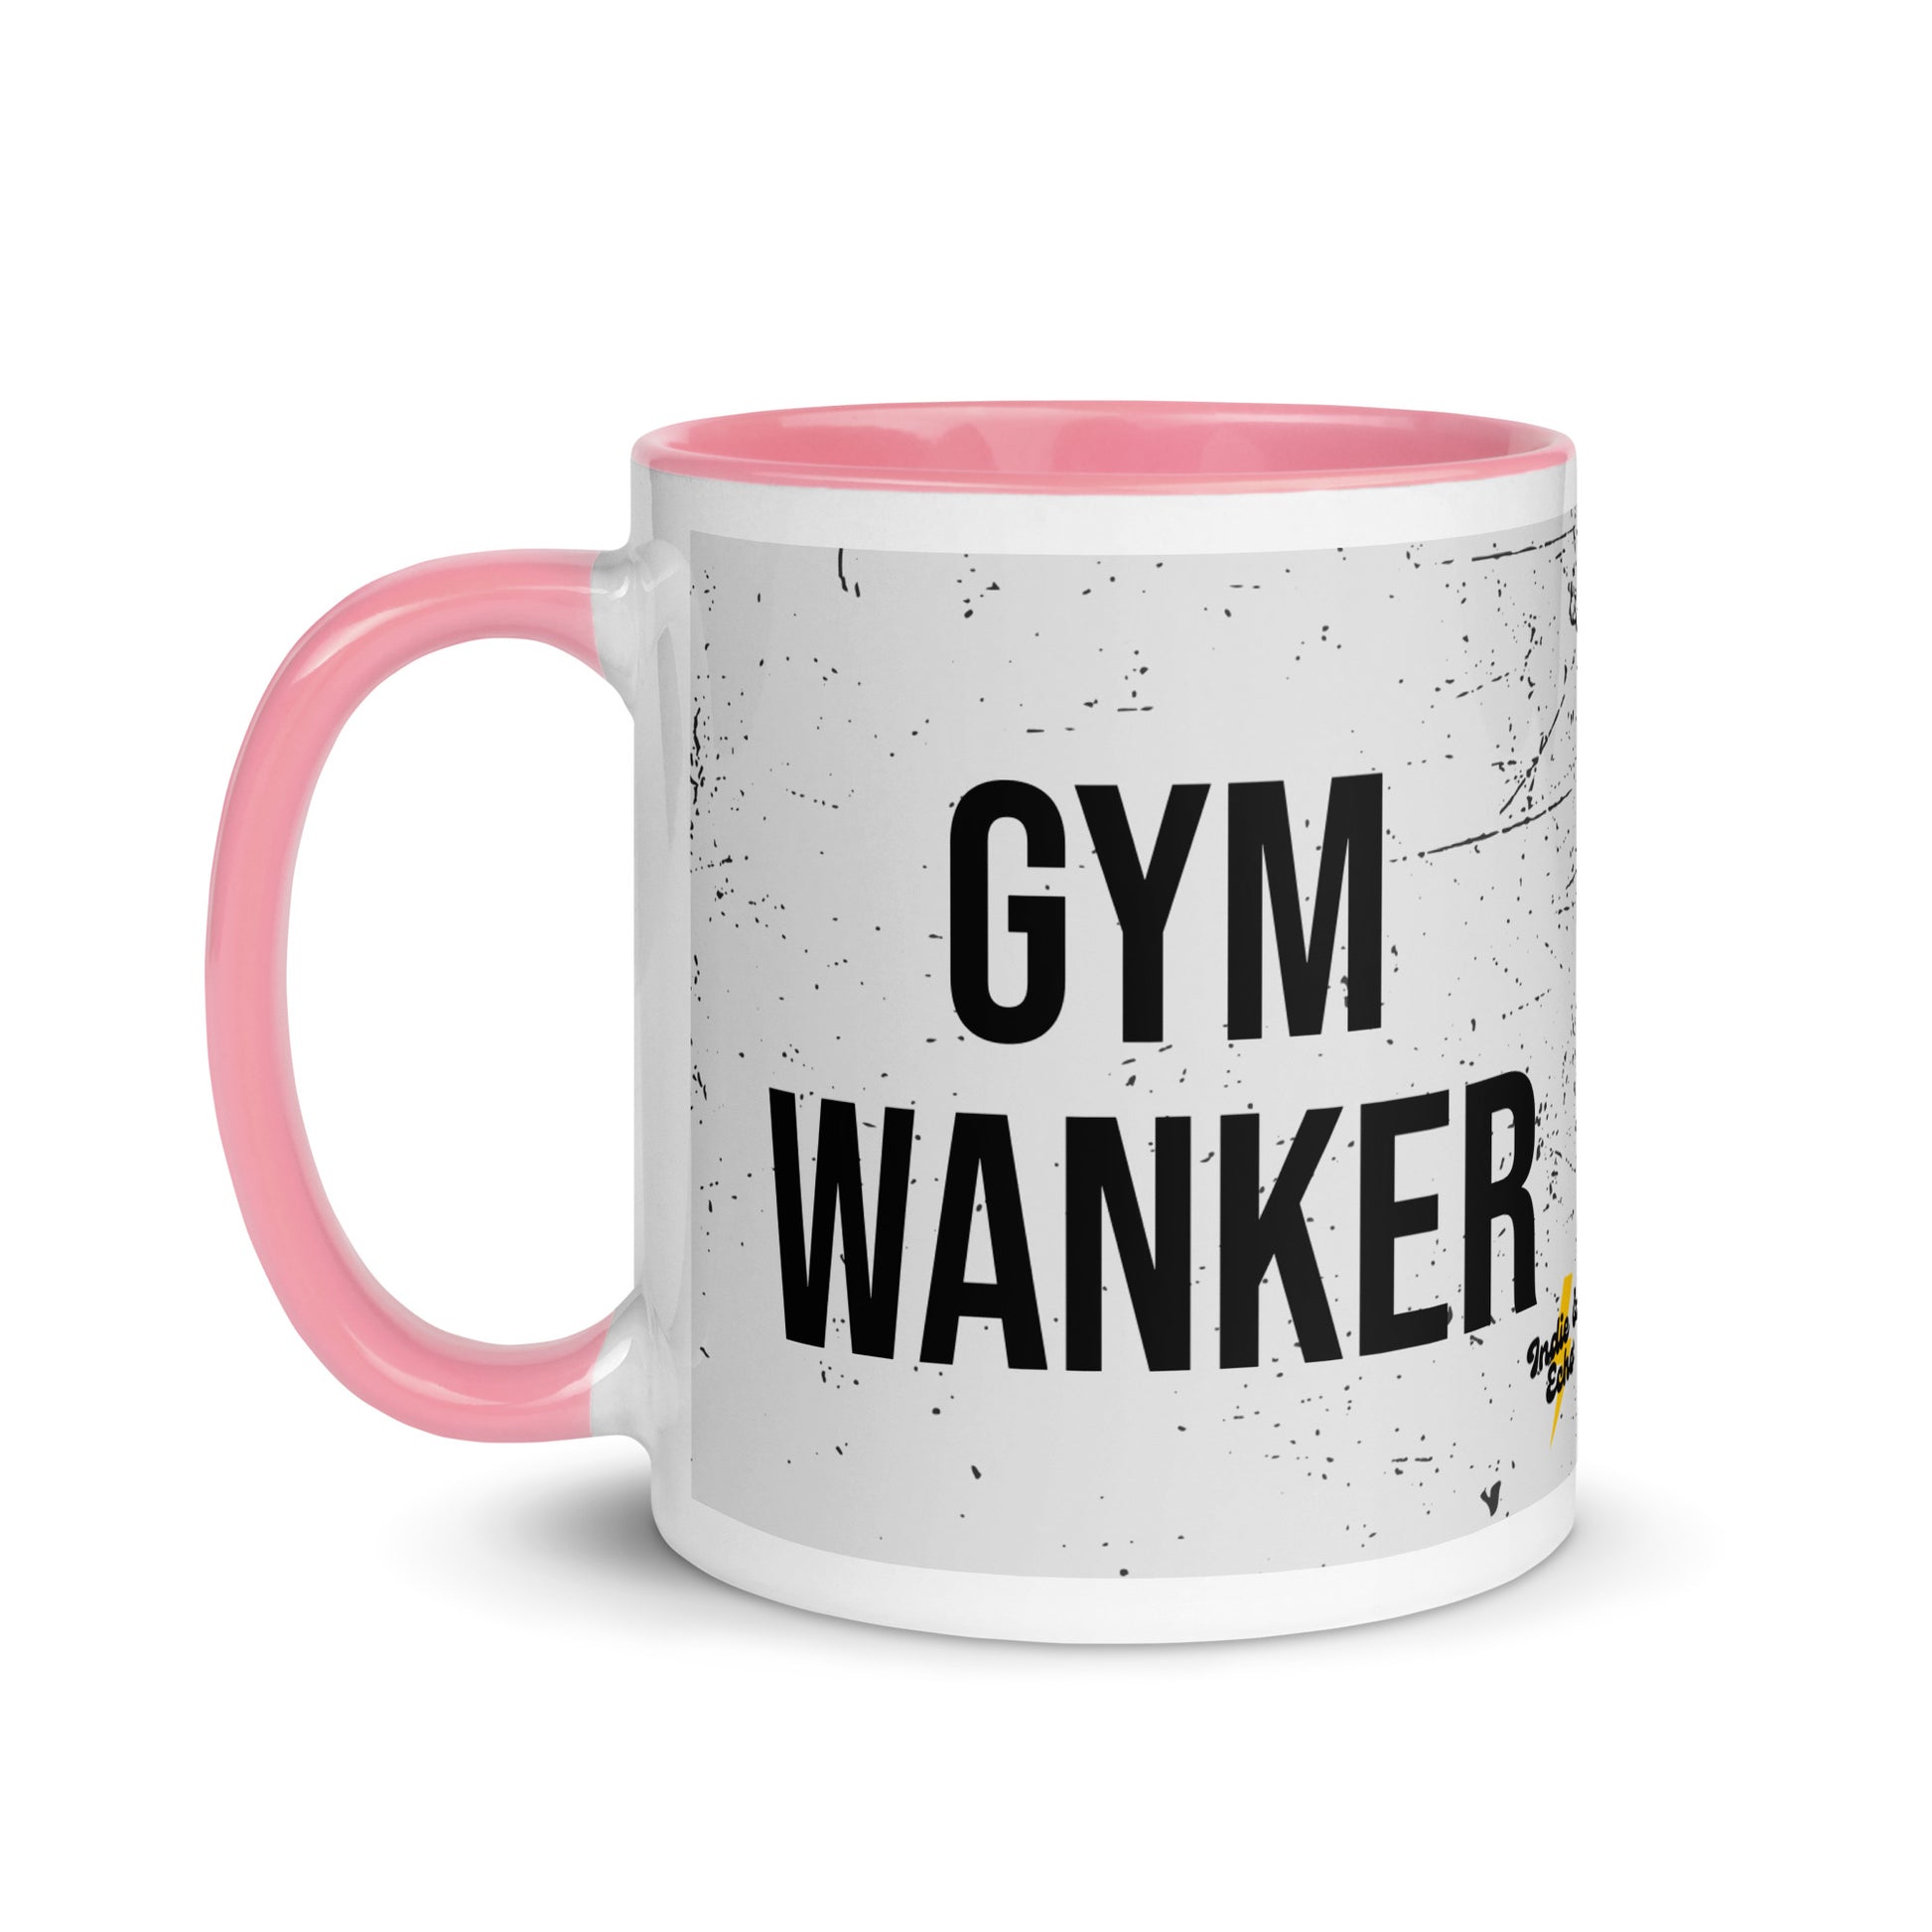 Pink handled mug with gym wanker written on it, across a grey splatter background. A gift for someone who loves the gym.